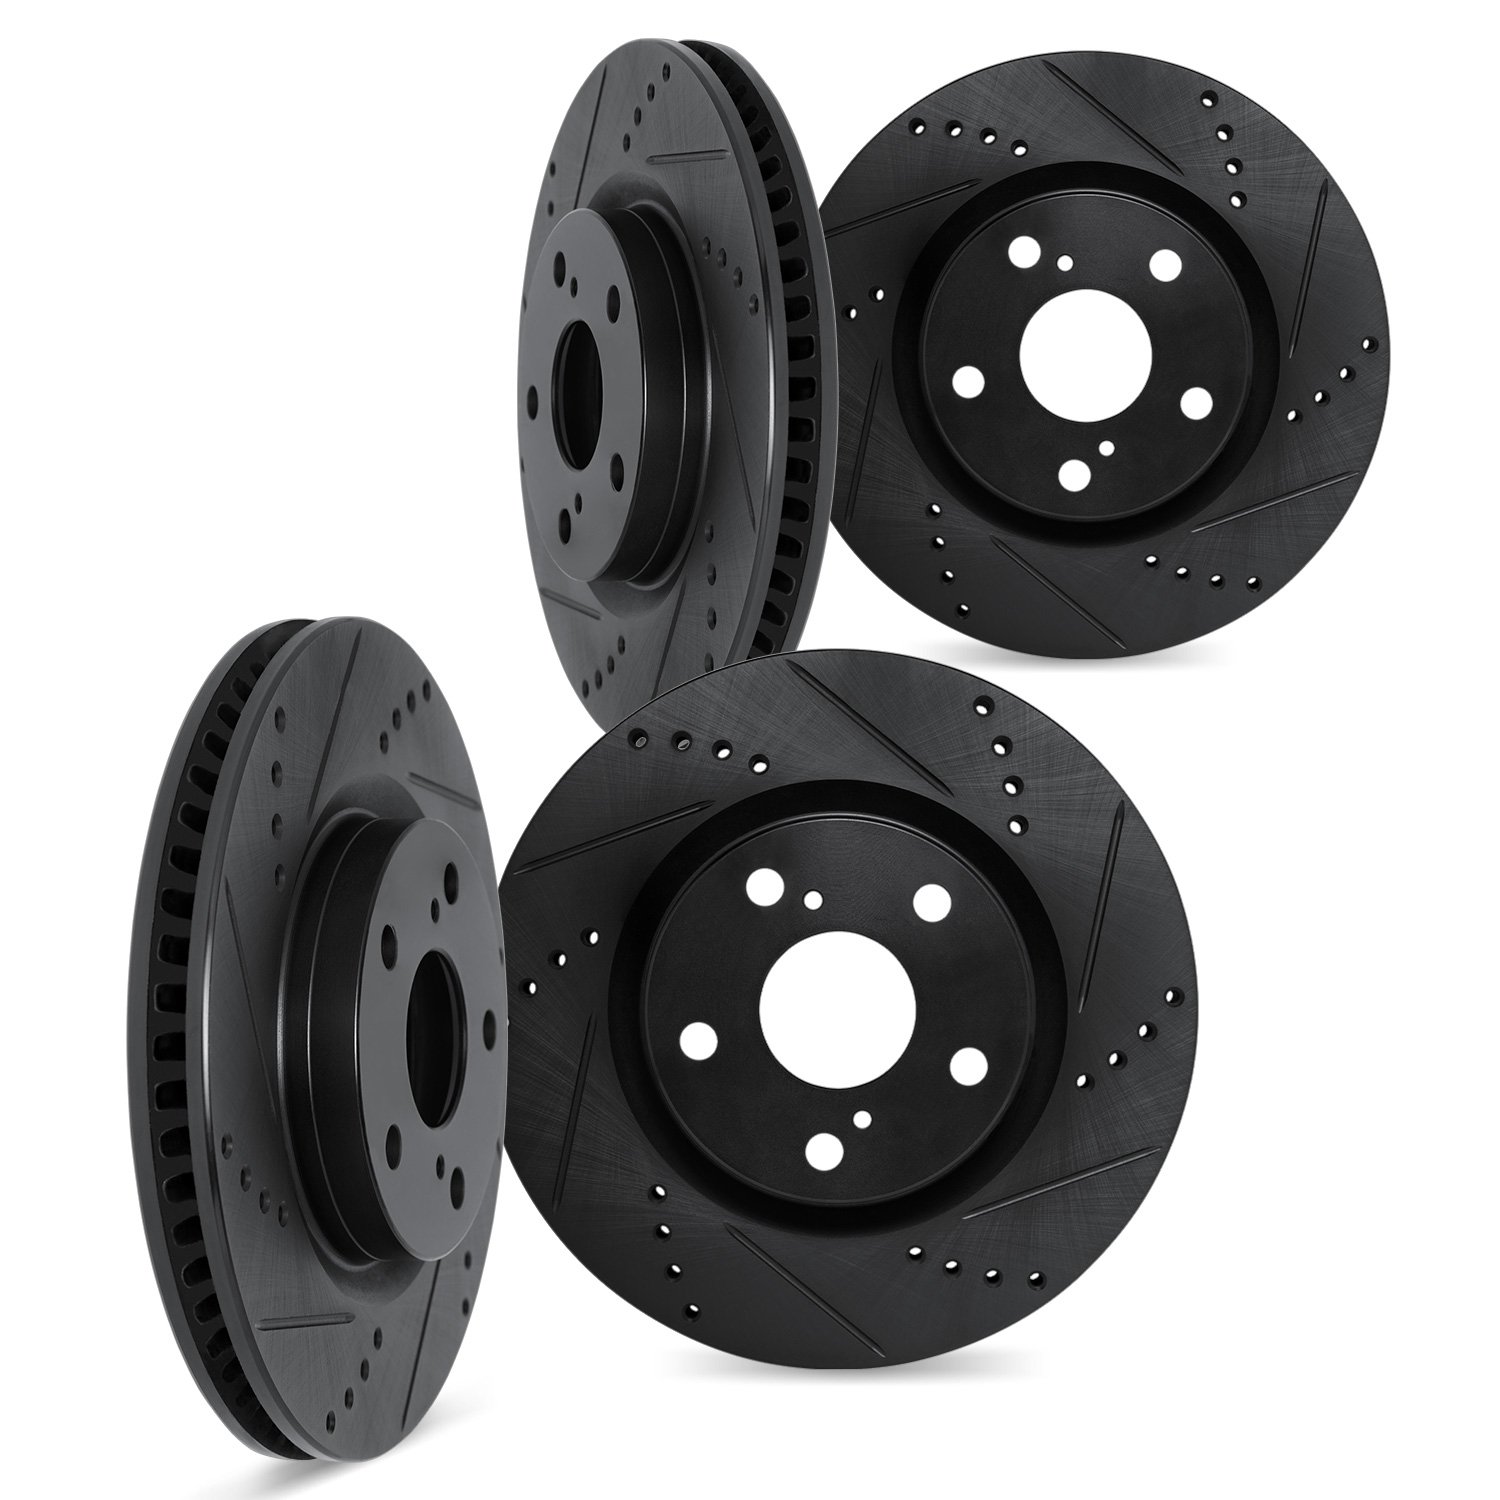 8004-92065 Drilled/Slotted Brake Rotors [Black], 2010-2015 Audi/Volkswagen, Position: Front and Rear